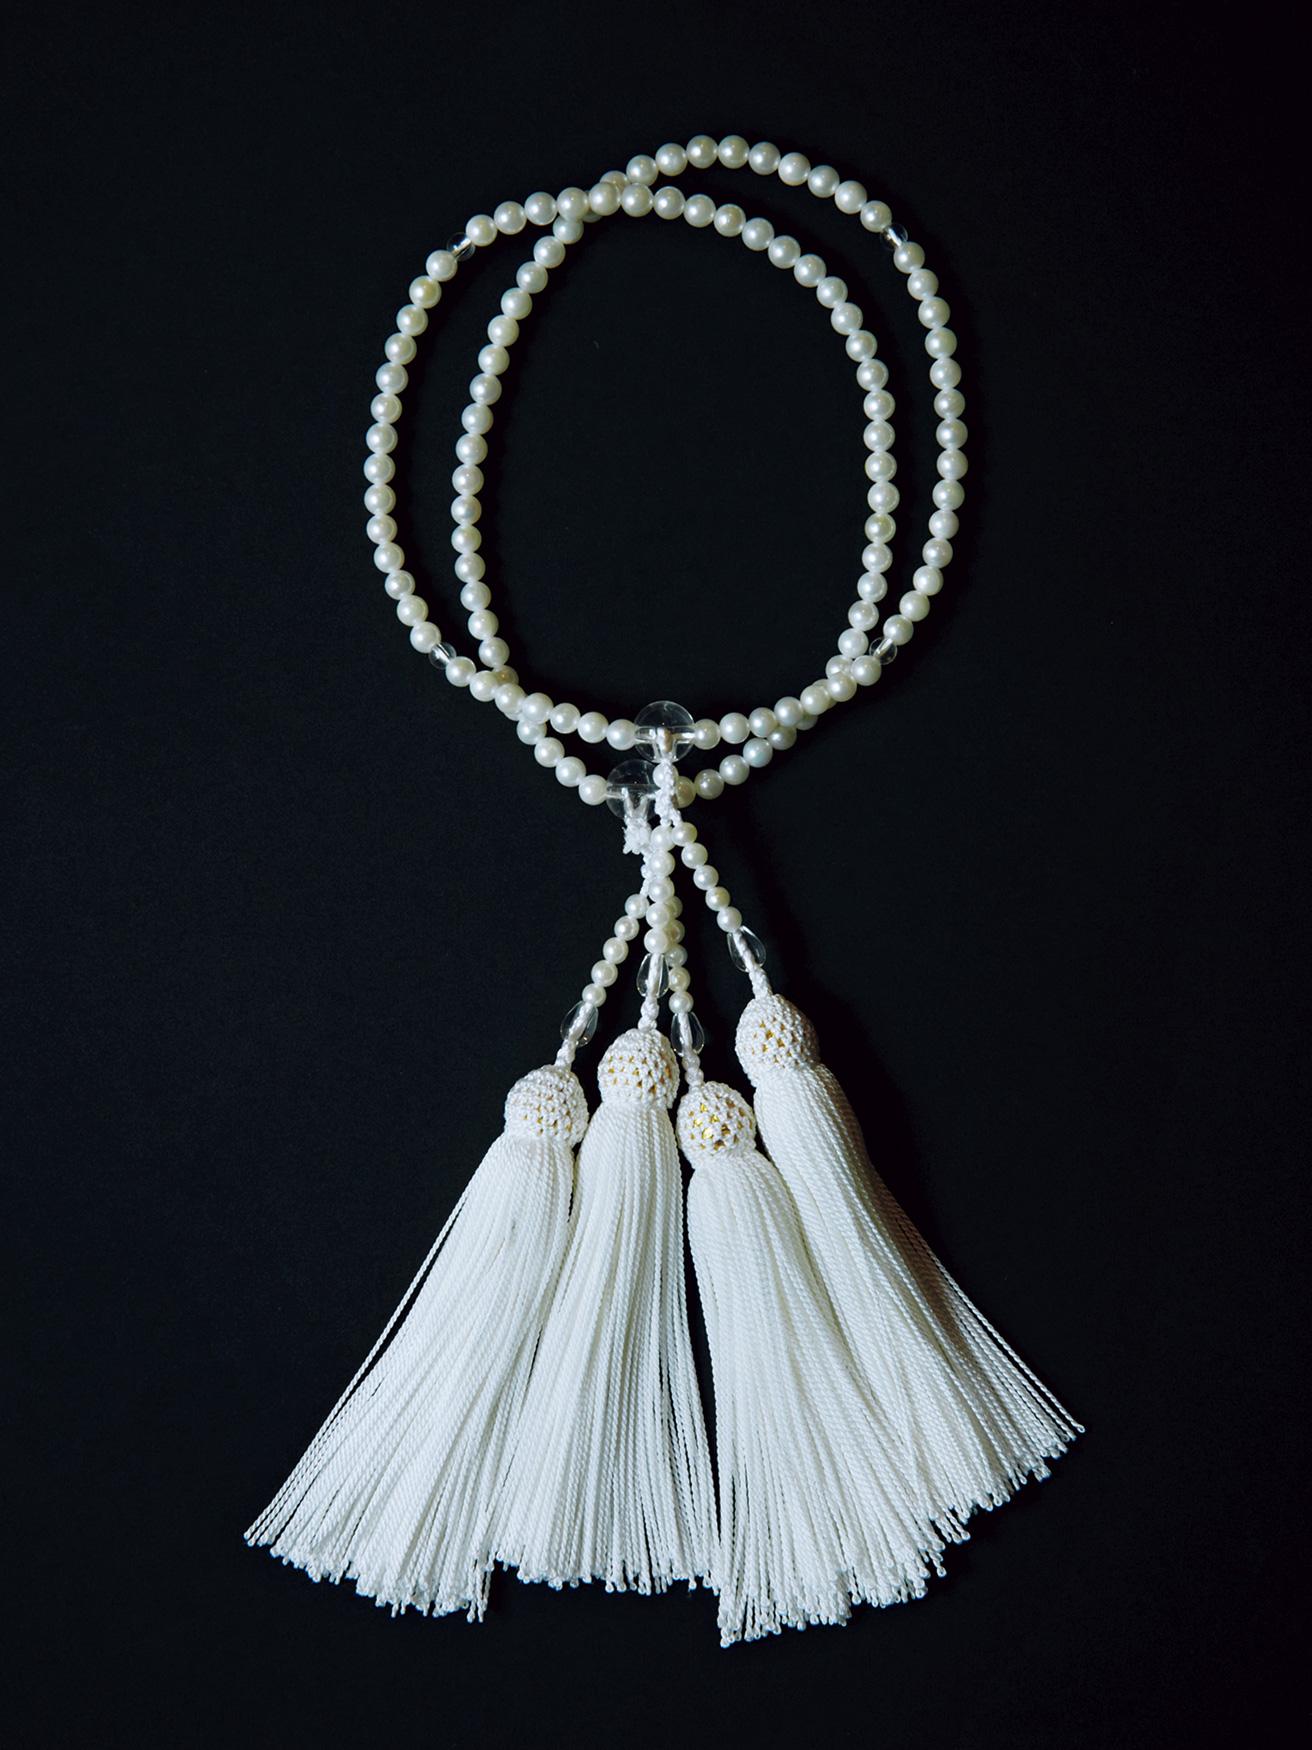 Purchase No. 53【Prayer Beads】Devotion takes the form of 108 beautifully connected spheres.